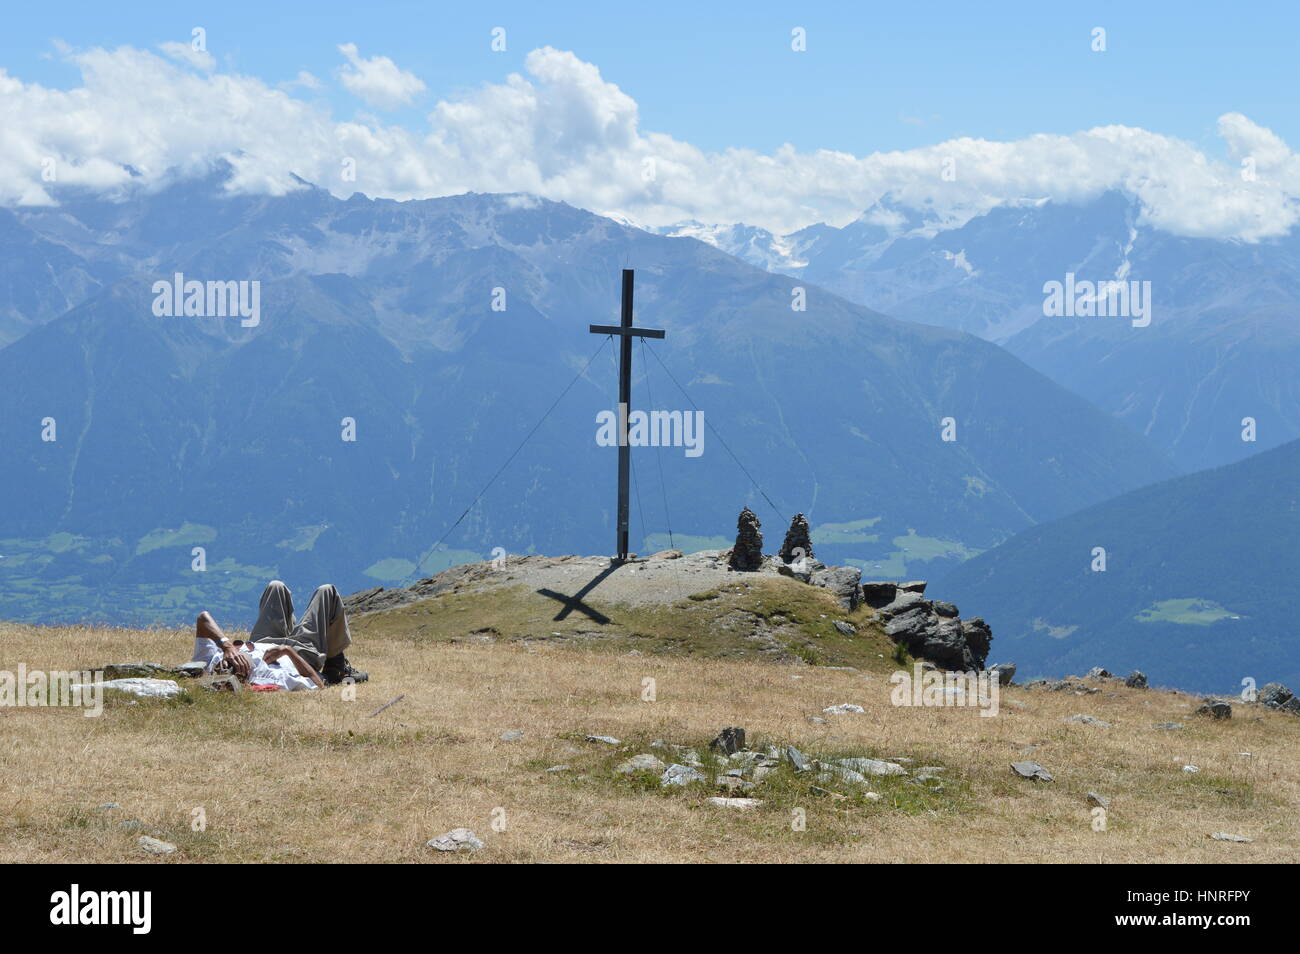 Vinschgau, Italy - July 31, 2015: Lonesome climber takes break on top of mountain Spitzige Lun near Matsch in South Tryol towards Etschtal, Vinschgau  Stock Photo